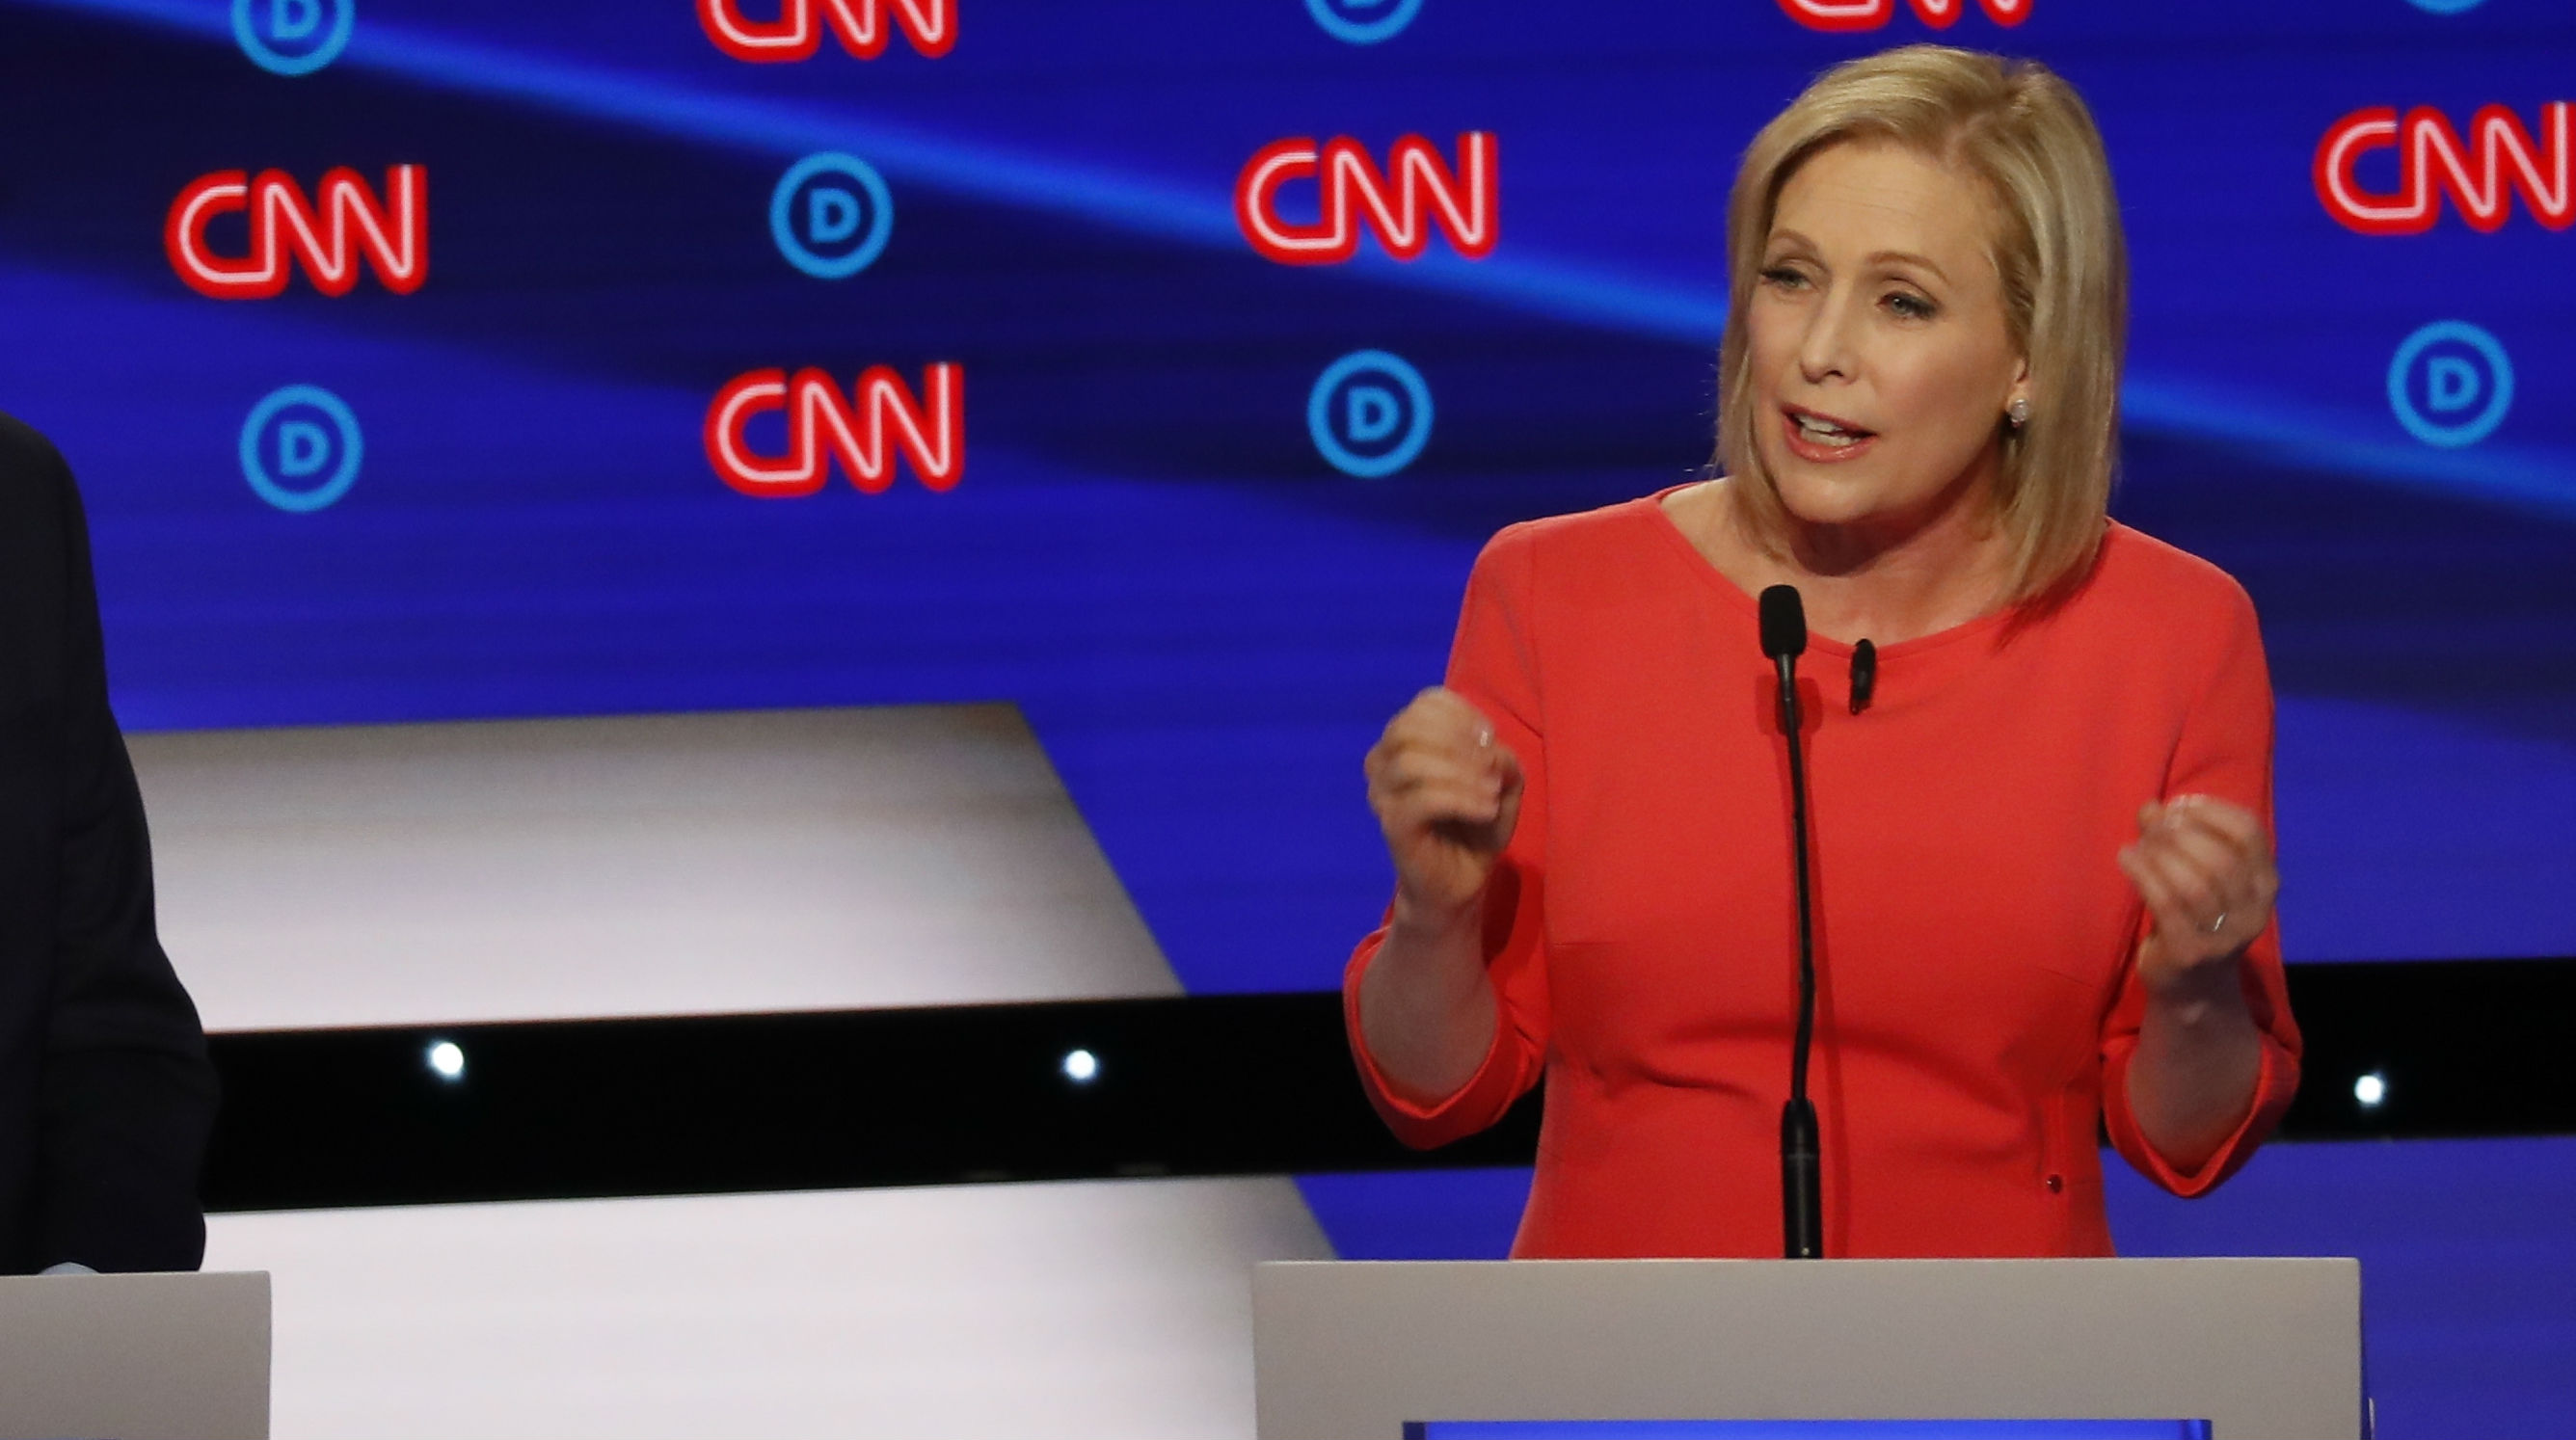 4 Takeaways From Gillibrand’s Failed Bid For President